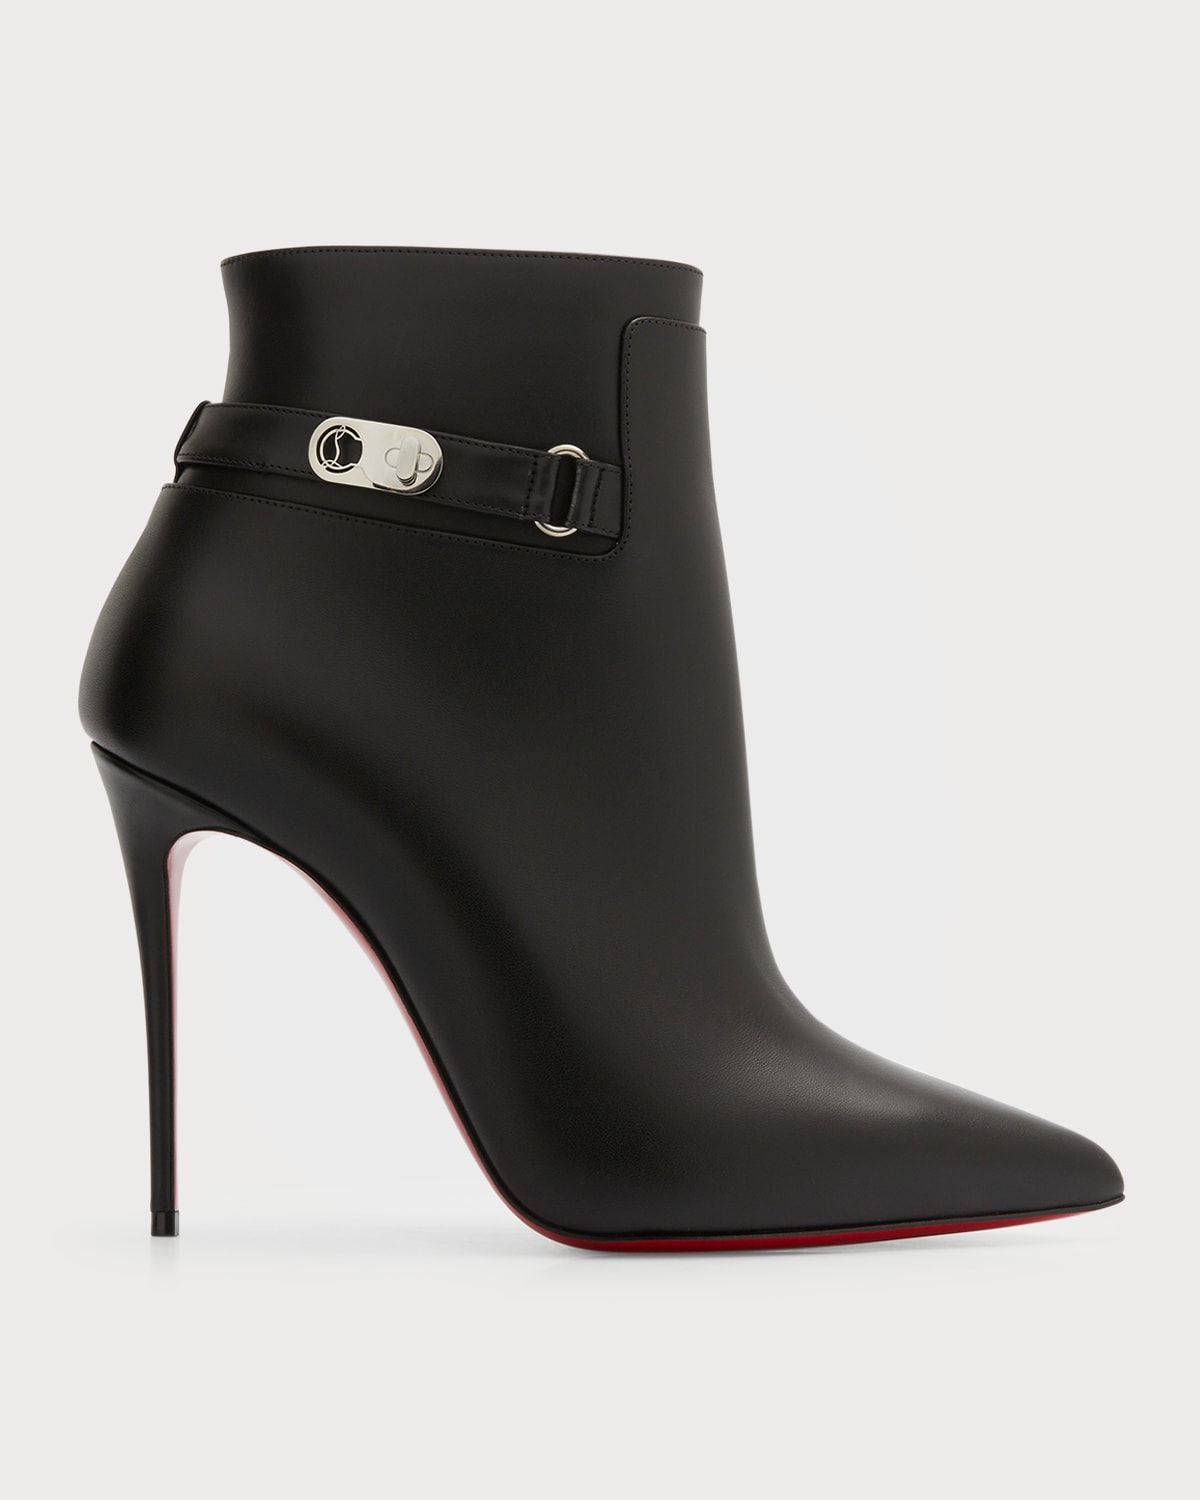 Christian Louboutin Lock So Kate Leather Red Sole Booties